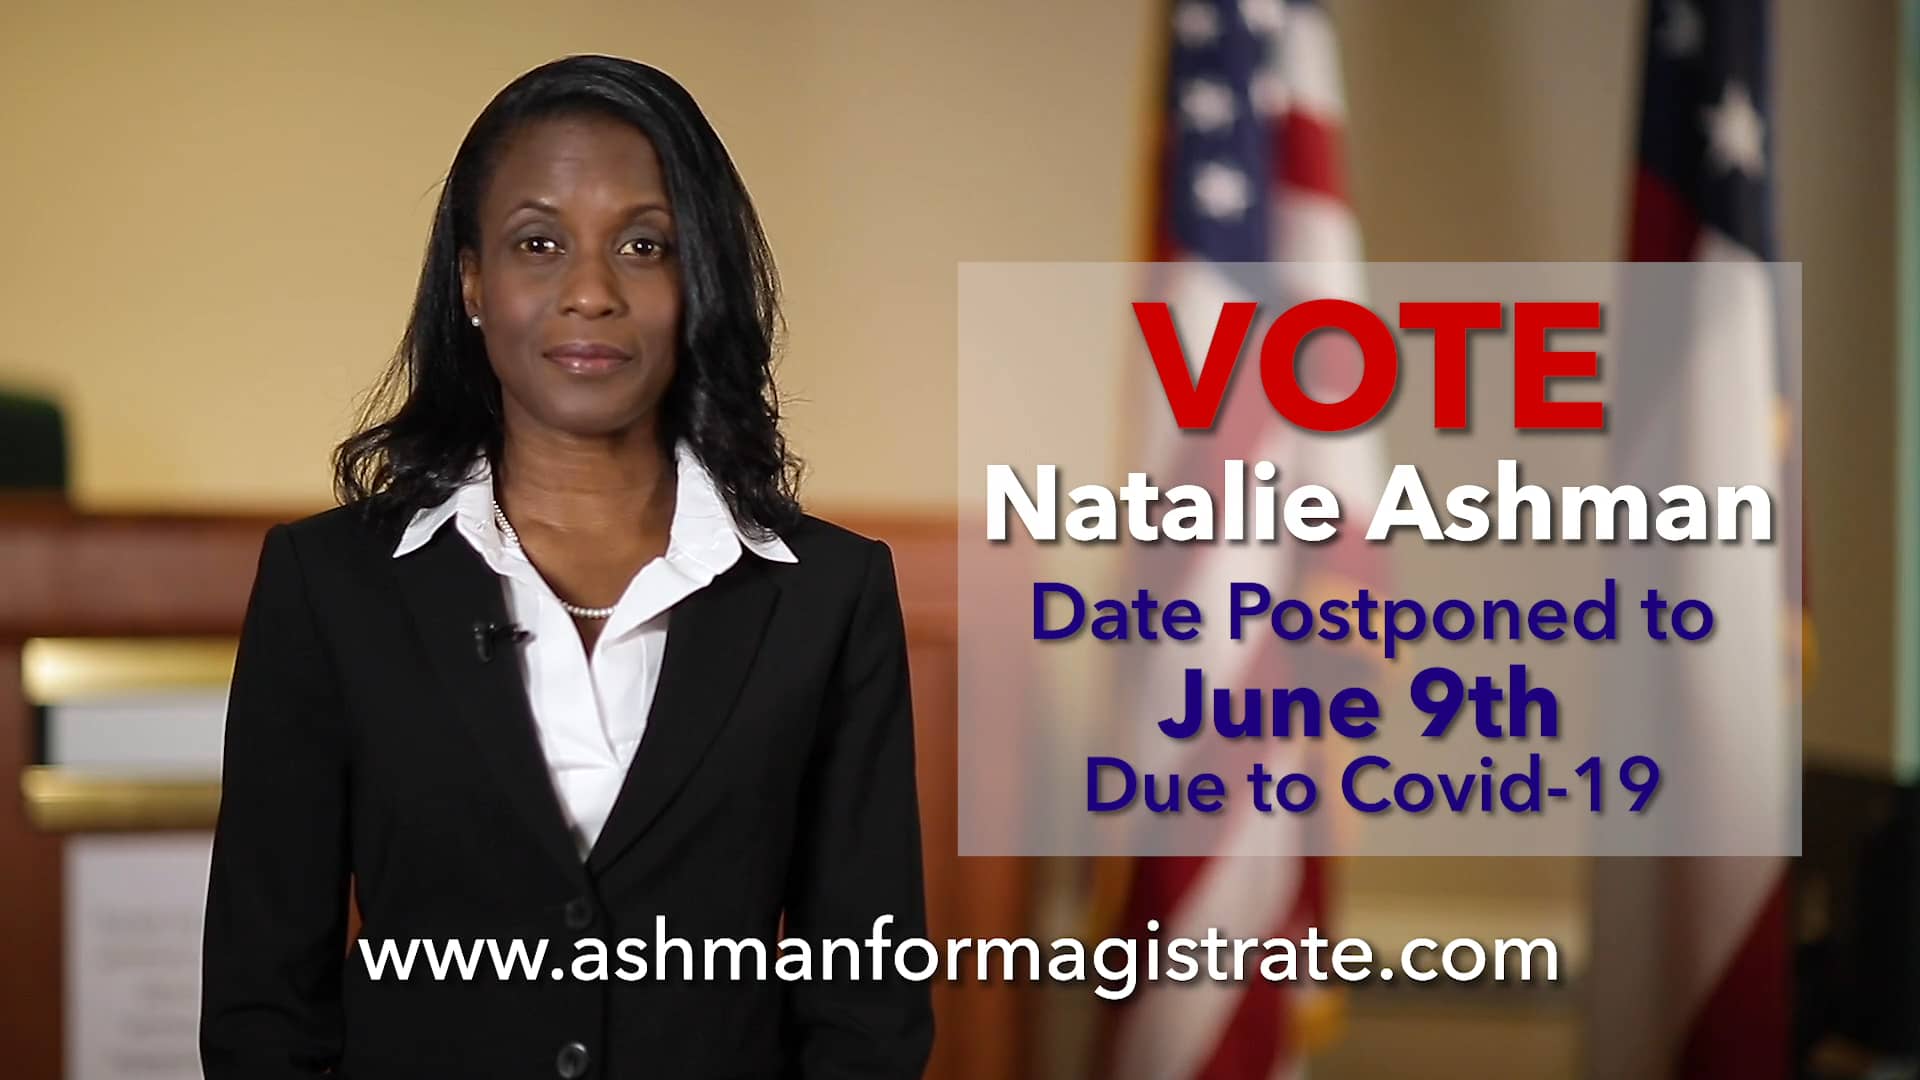 Natalie Ashman for Fayette County Magistrate Judge on Vimeo